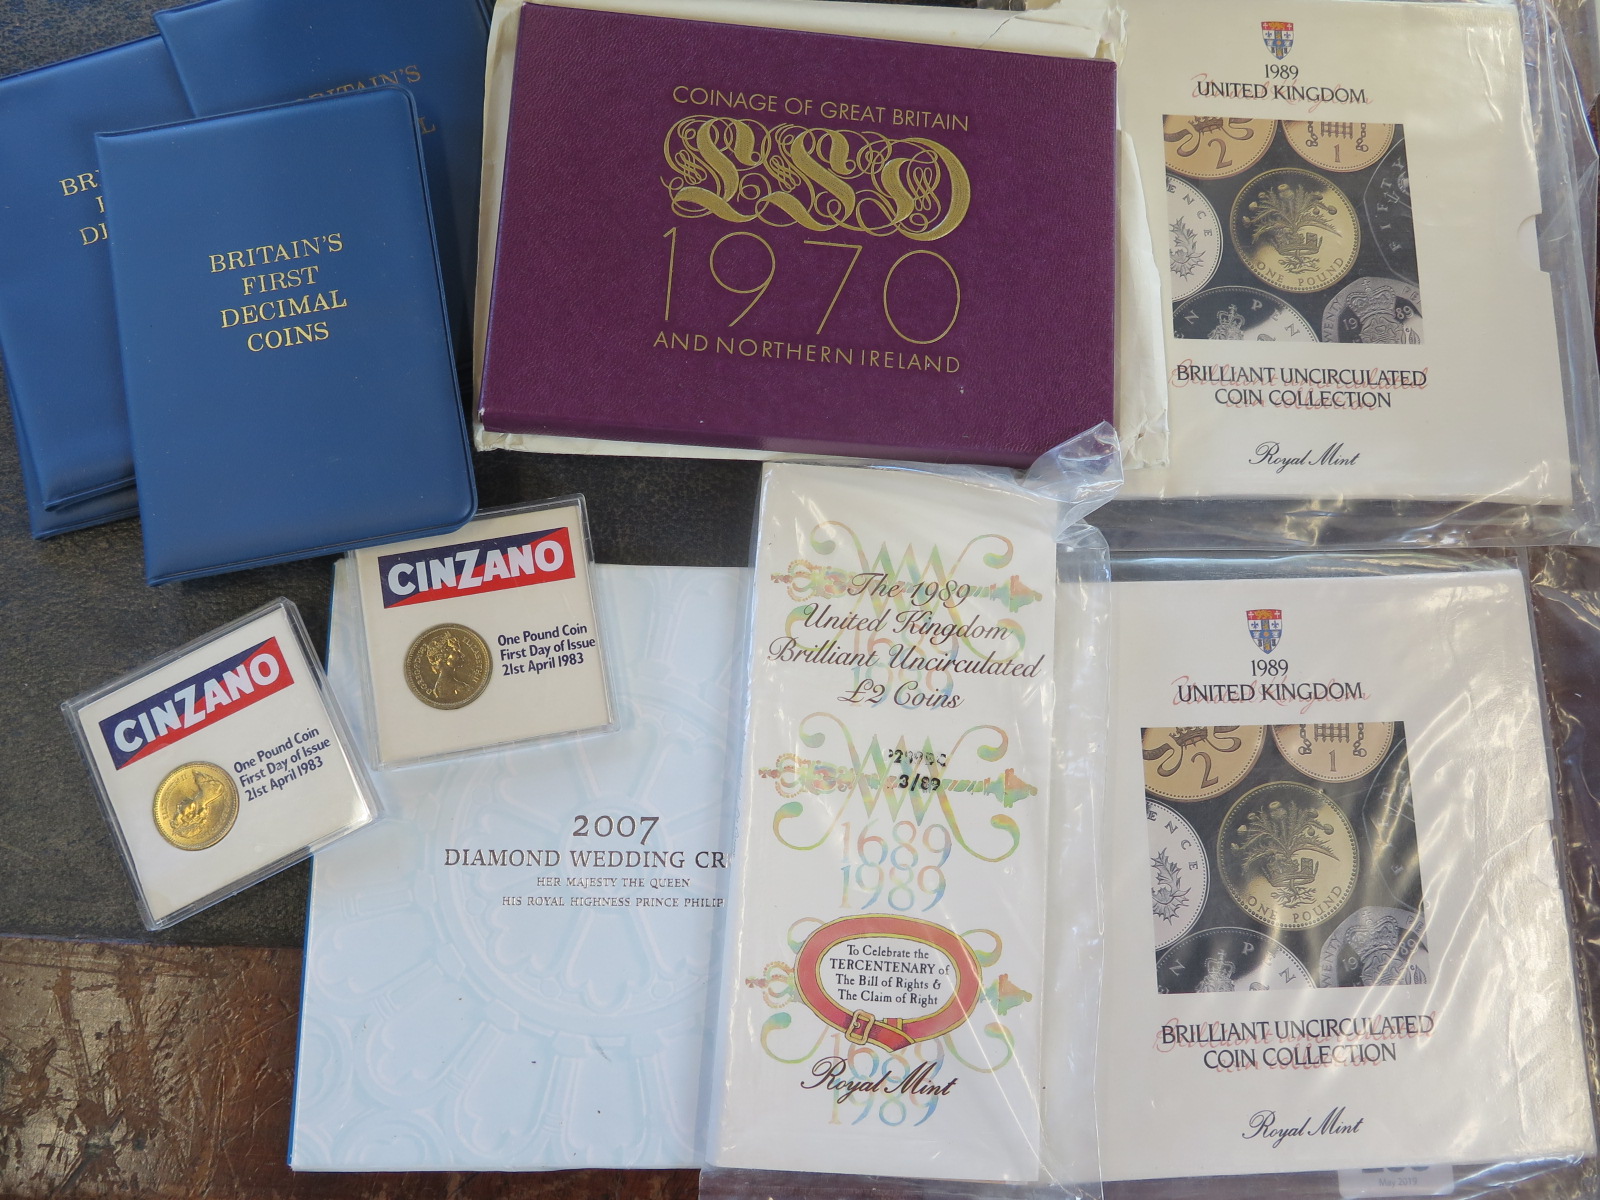 A collection of British coinage, including un-circulated British coins, first decimal coin sets